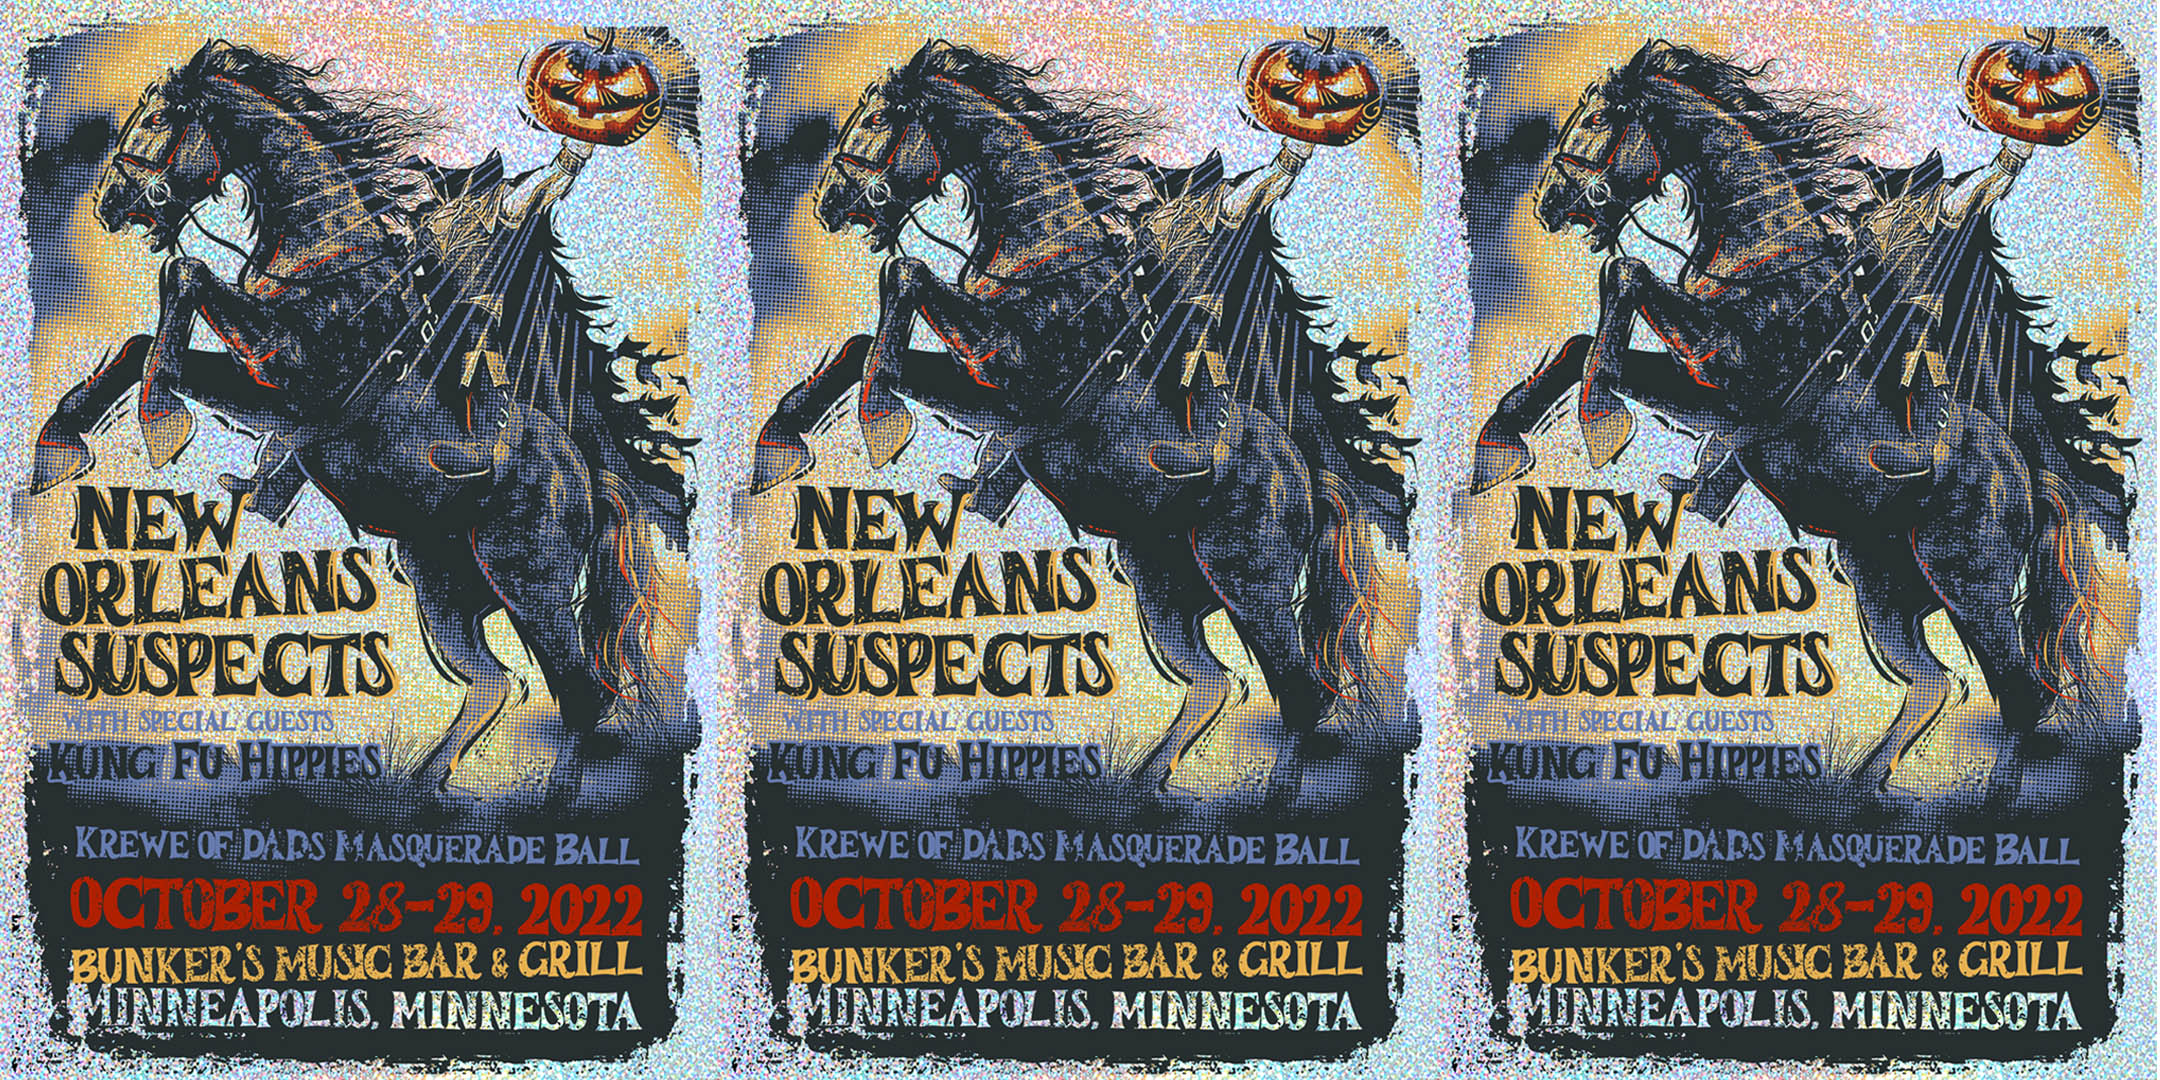 Krewe of DADs & Nobool Presents New Orleans Suspects with guest Kung Fu Hippies October 28 & 29, 2022 Bunker's Music Bar & Grill